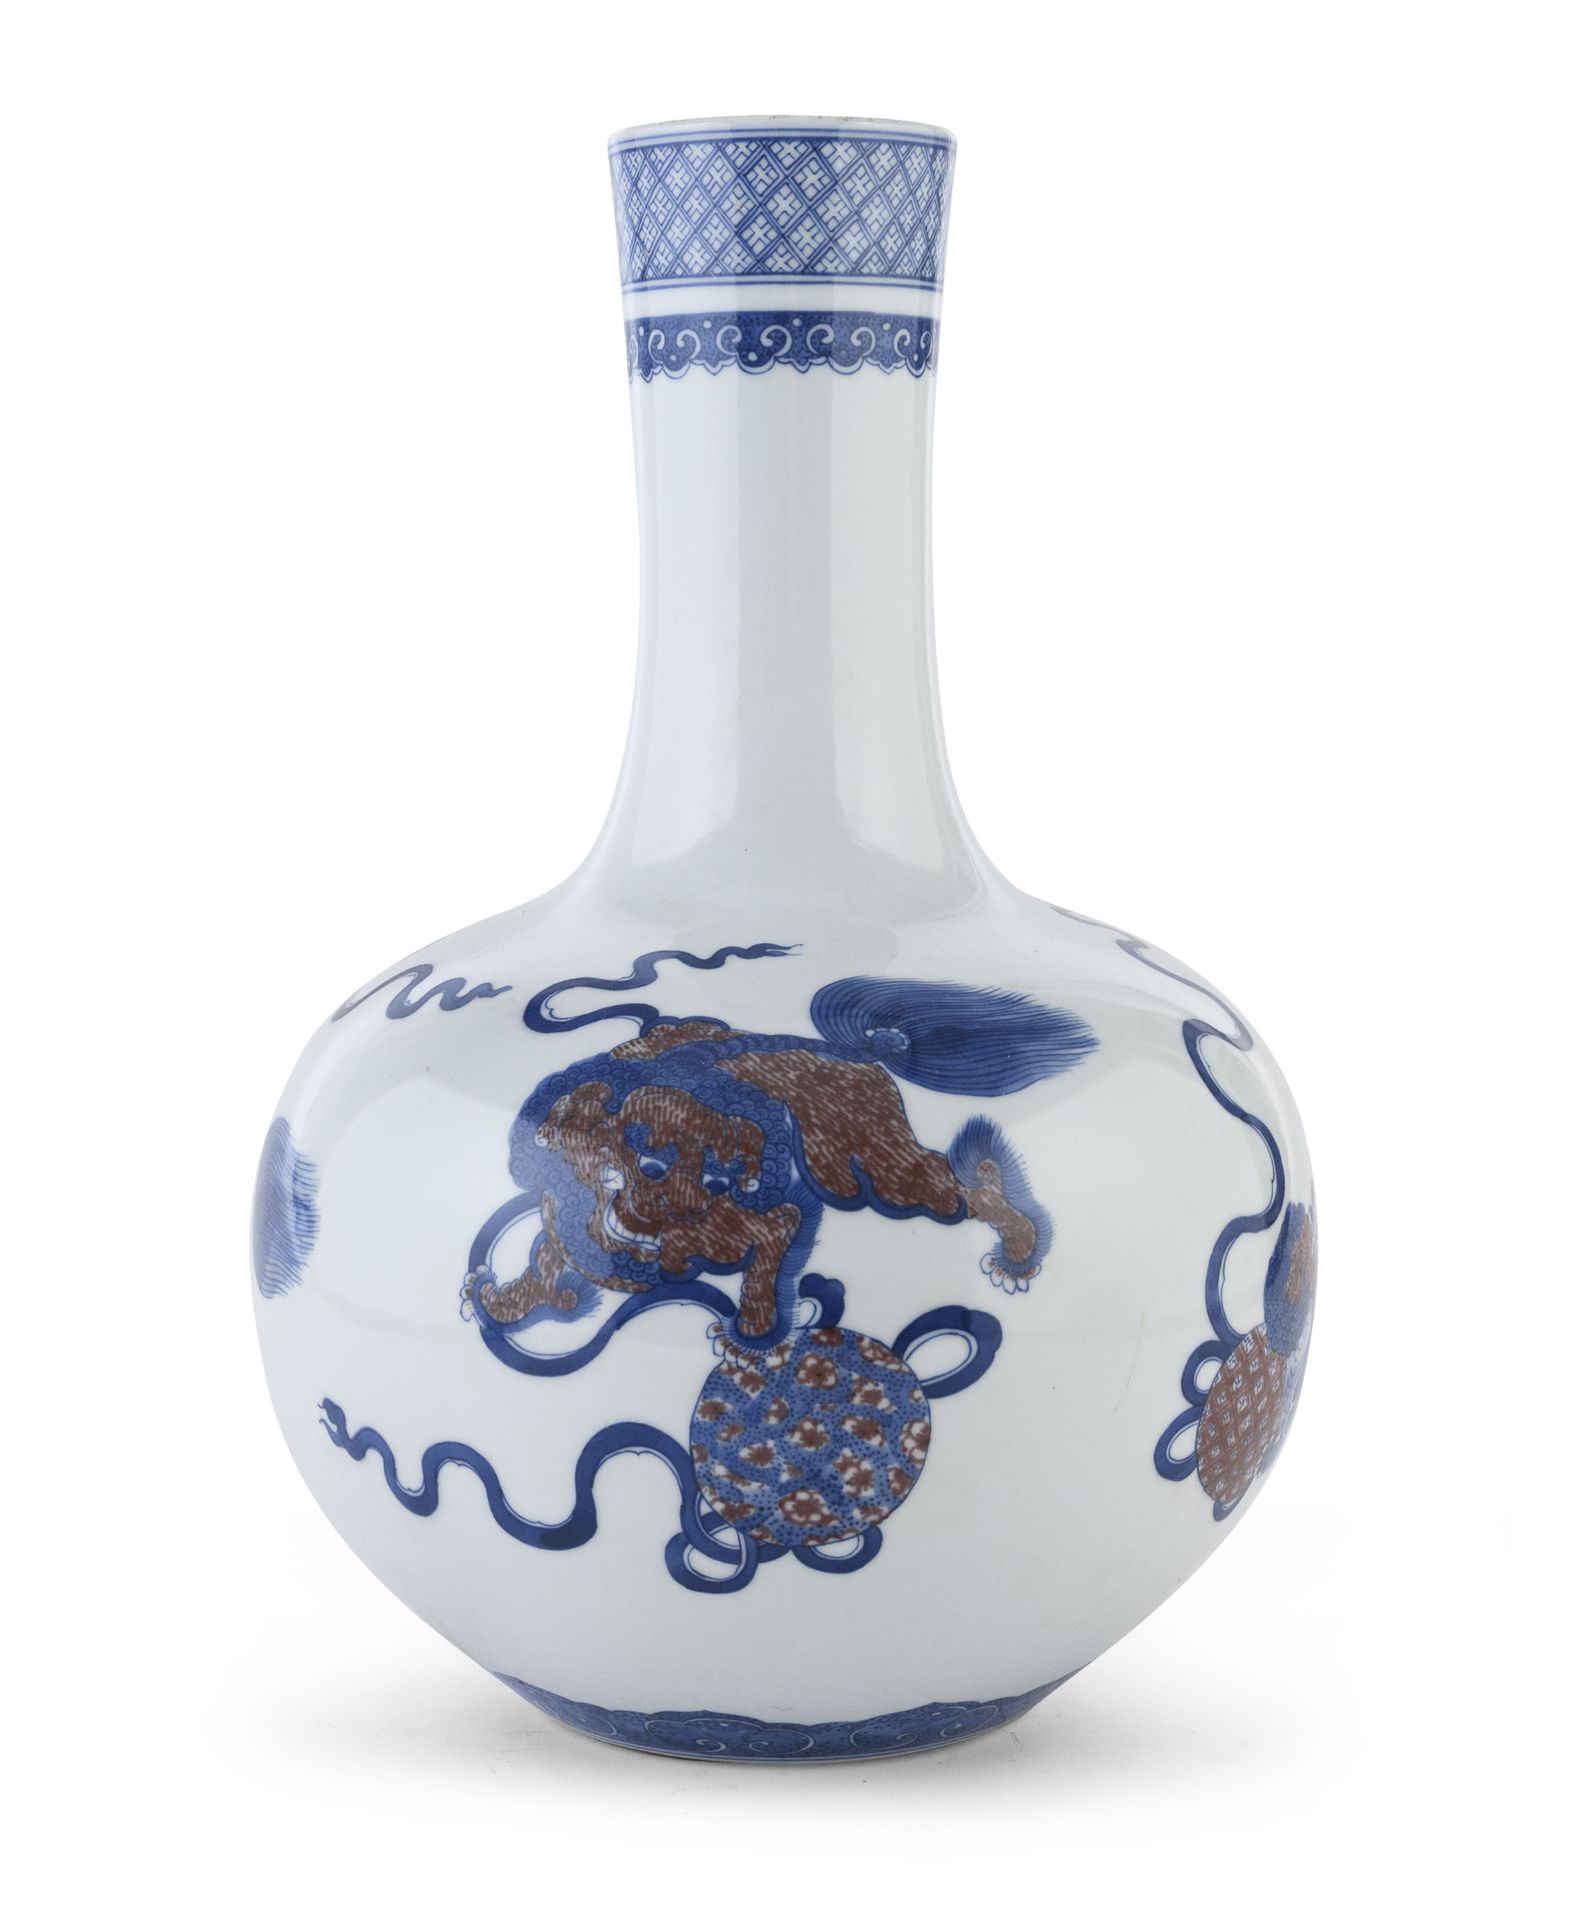 A POLYCHROME-DECORATED PORCELAIN VASE CHINA EARLY 20TH CENTURY